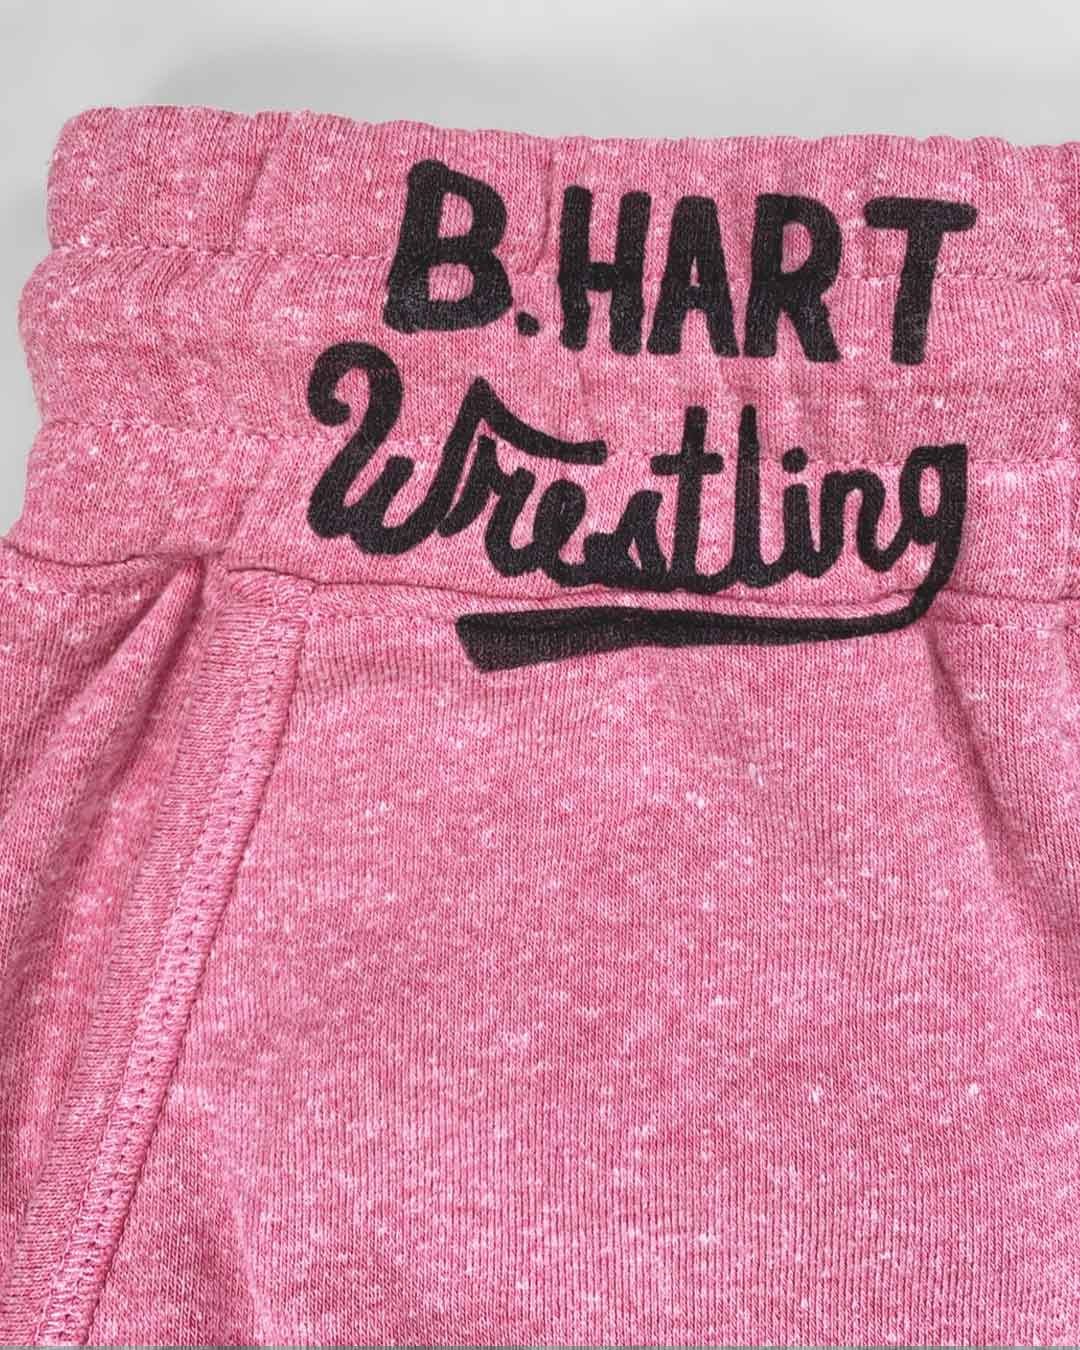 Bret Hart Shorts - Roots of Inc dba Roots of Fight